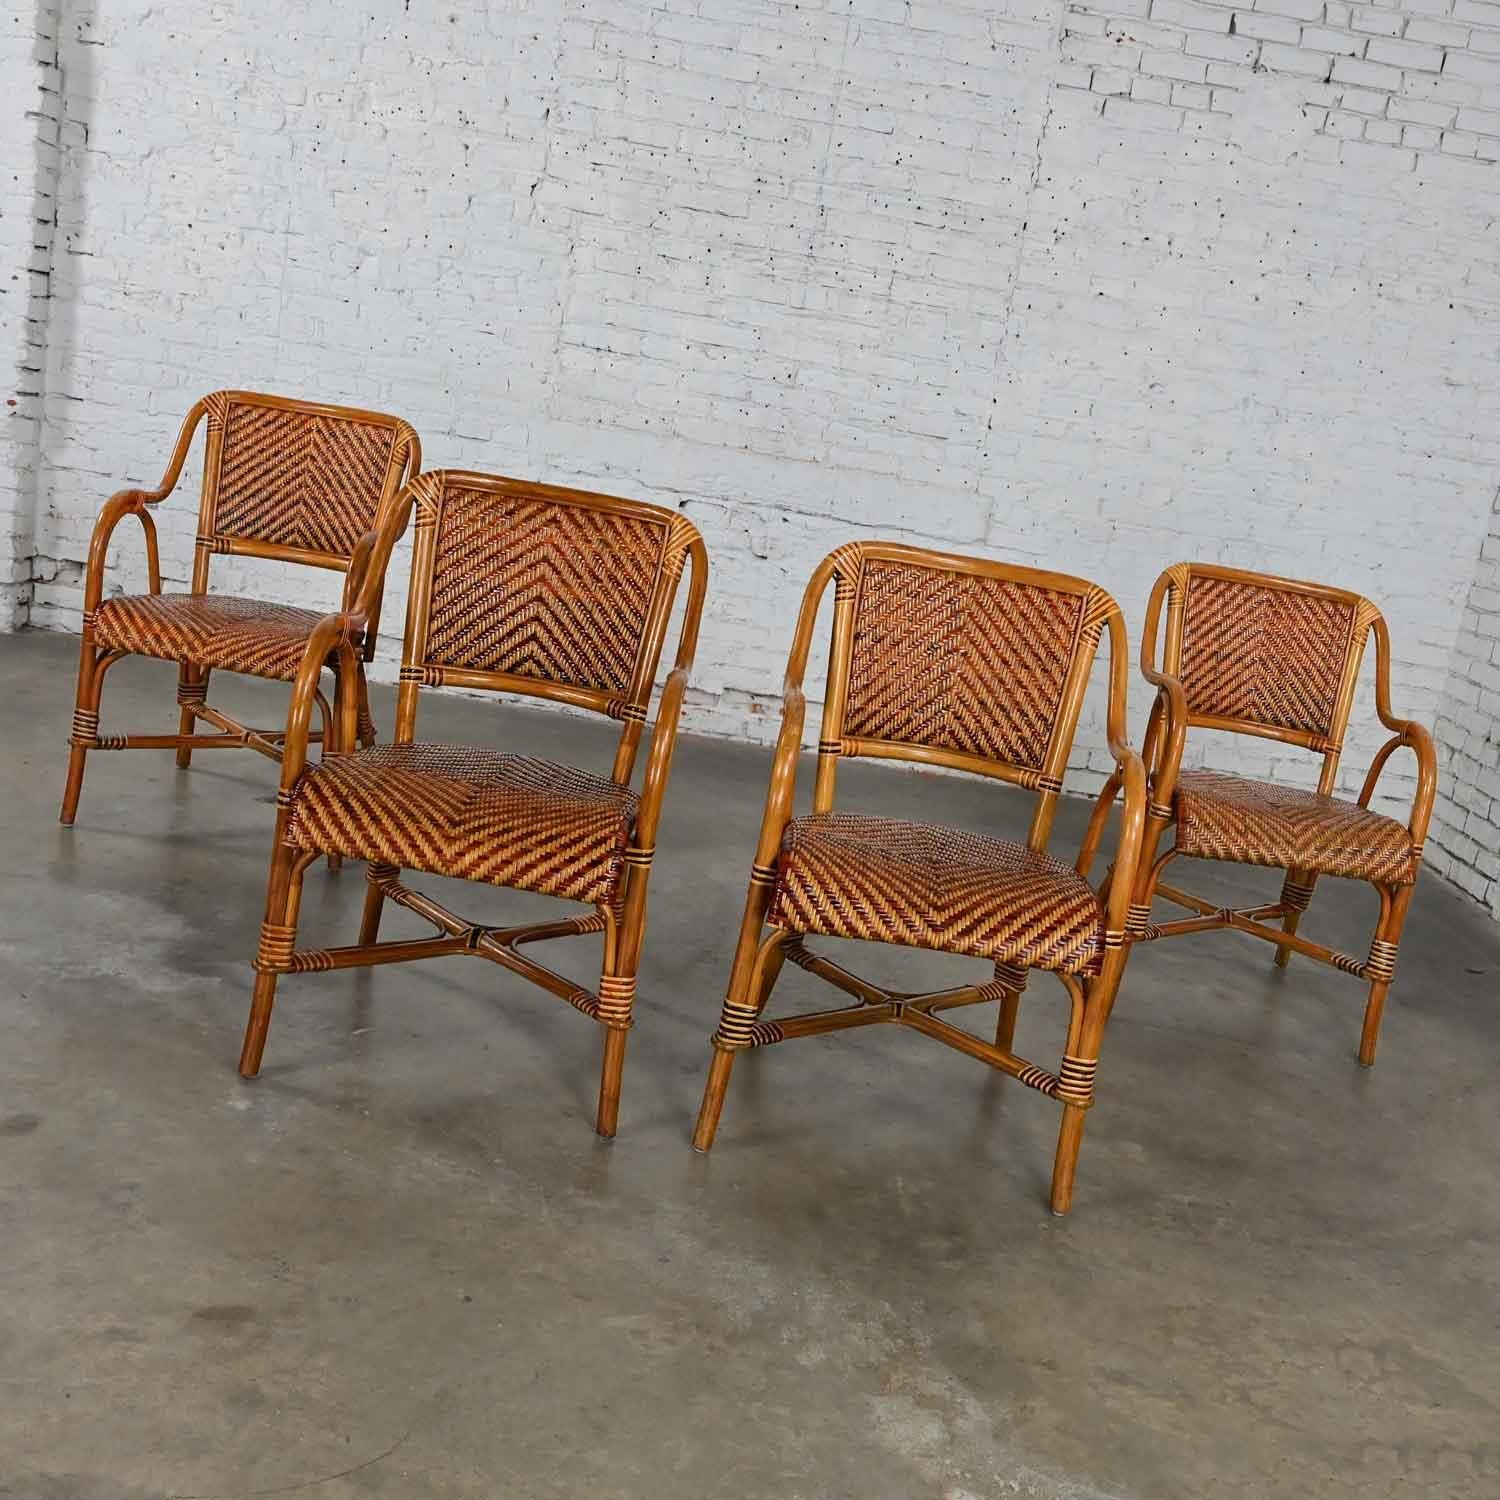 Unknown Boho Chic 2 Toned Wicker Rattan Café Bistro or Conservatory Armchairs Set of 4